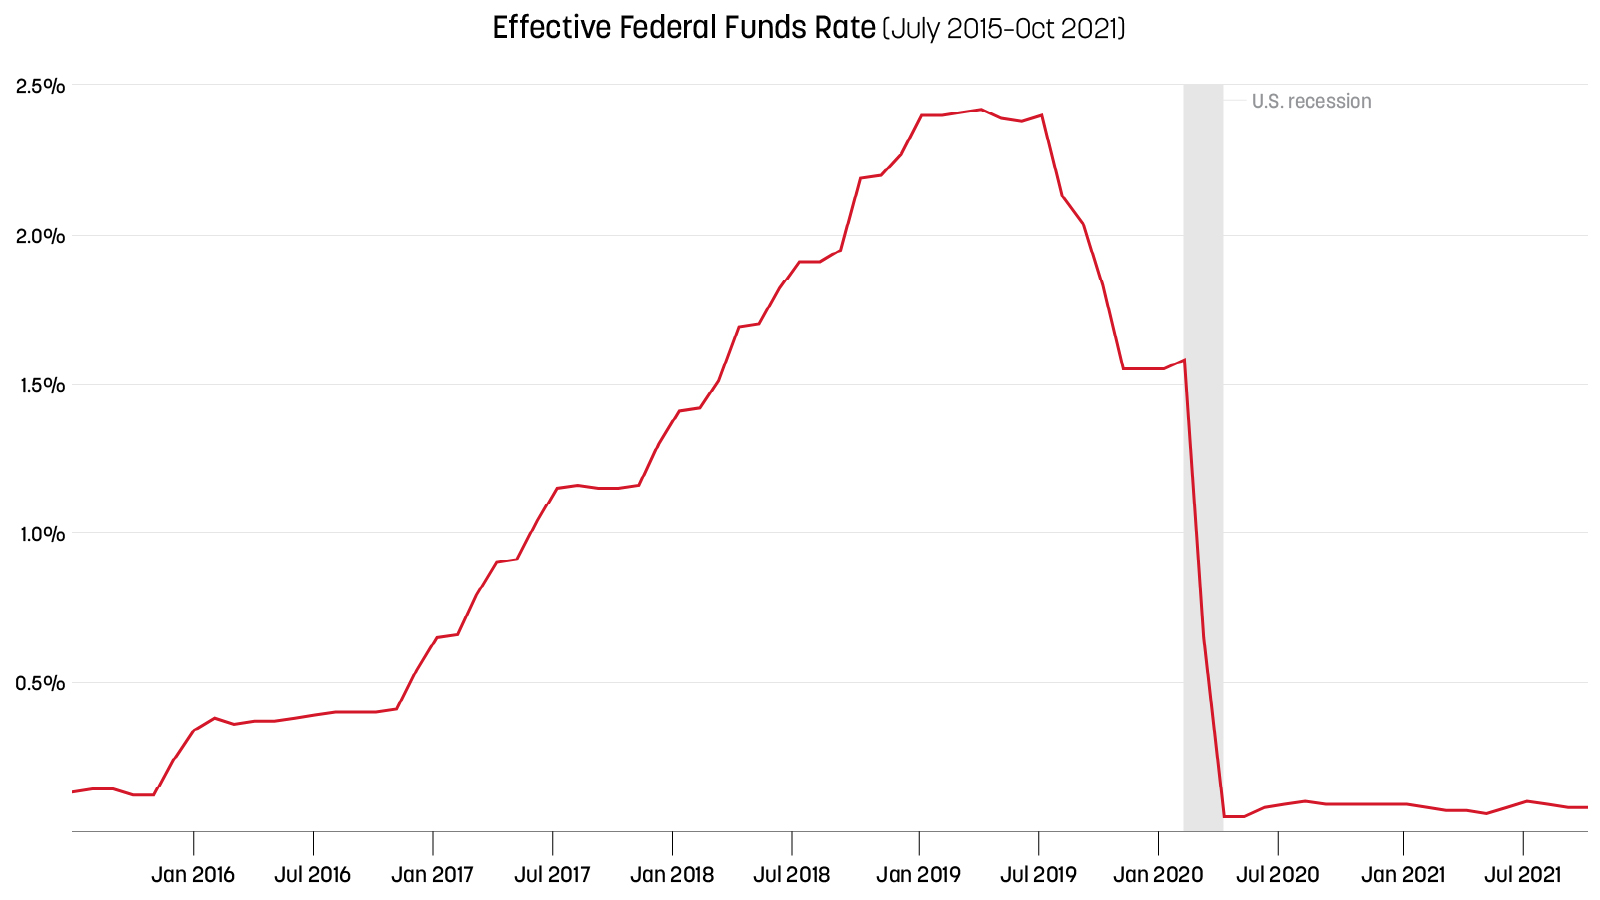 cost of funds vs cost of deposits - effective federal funds rate (July 2015-Oct 2021)